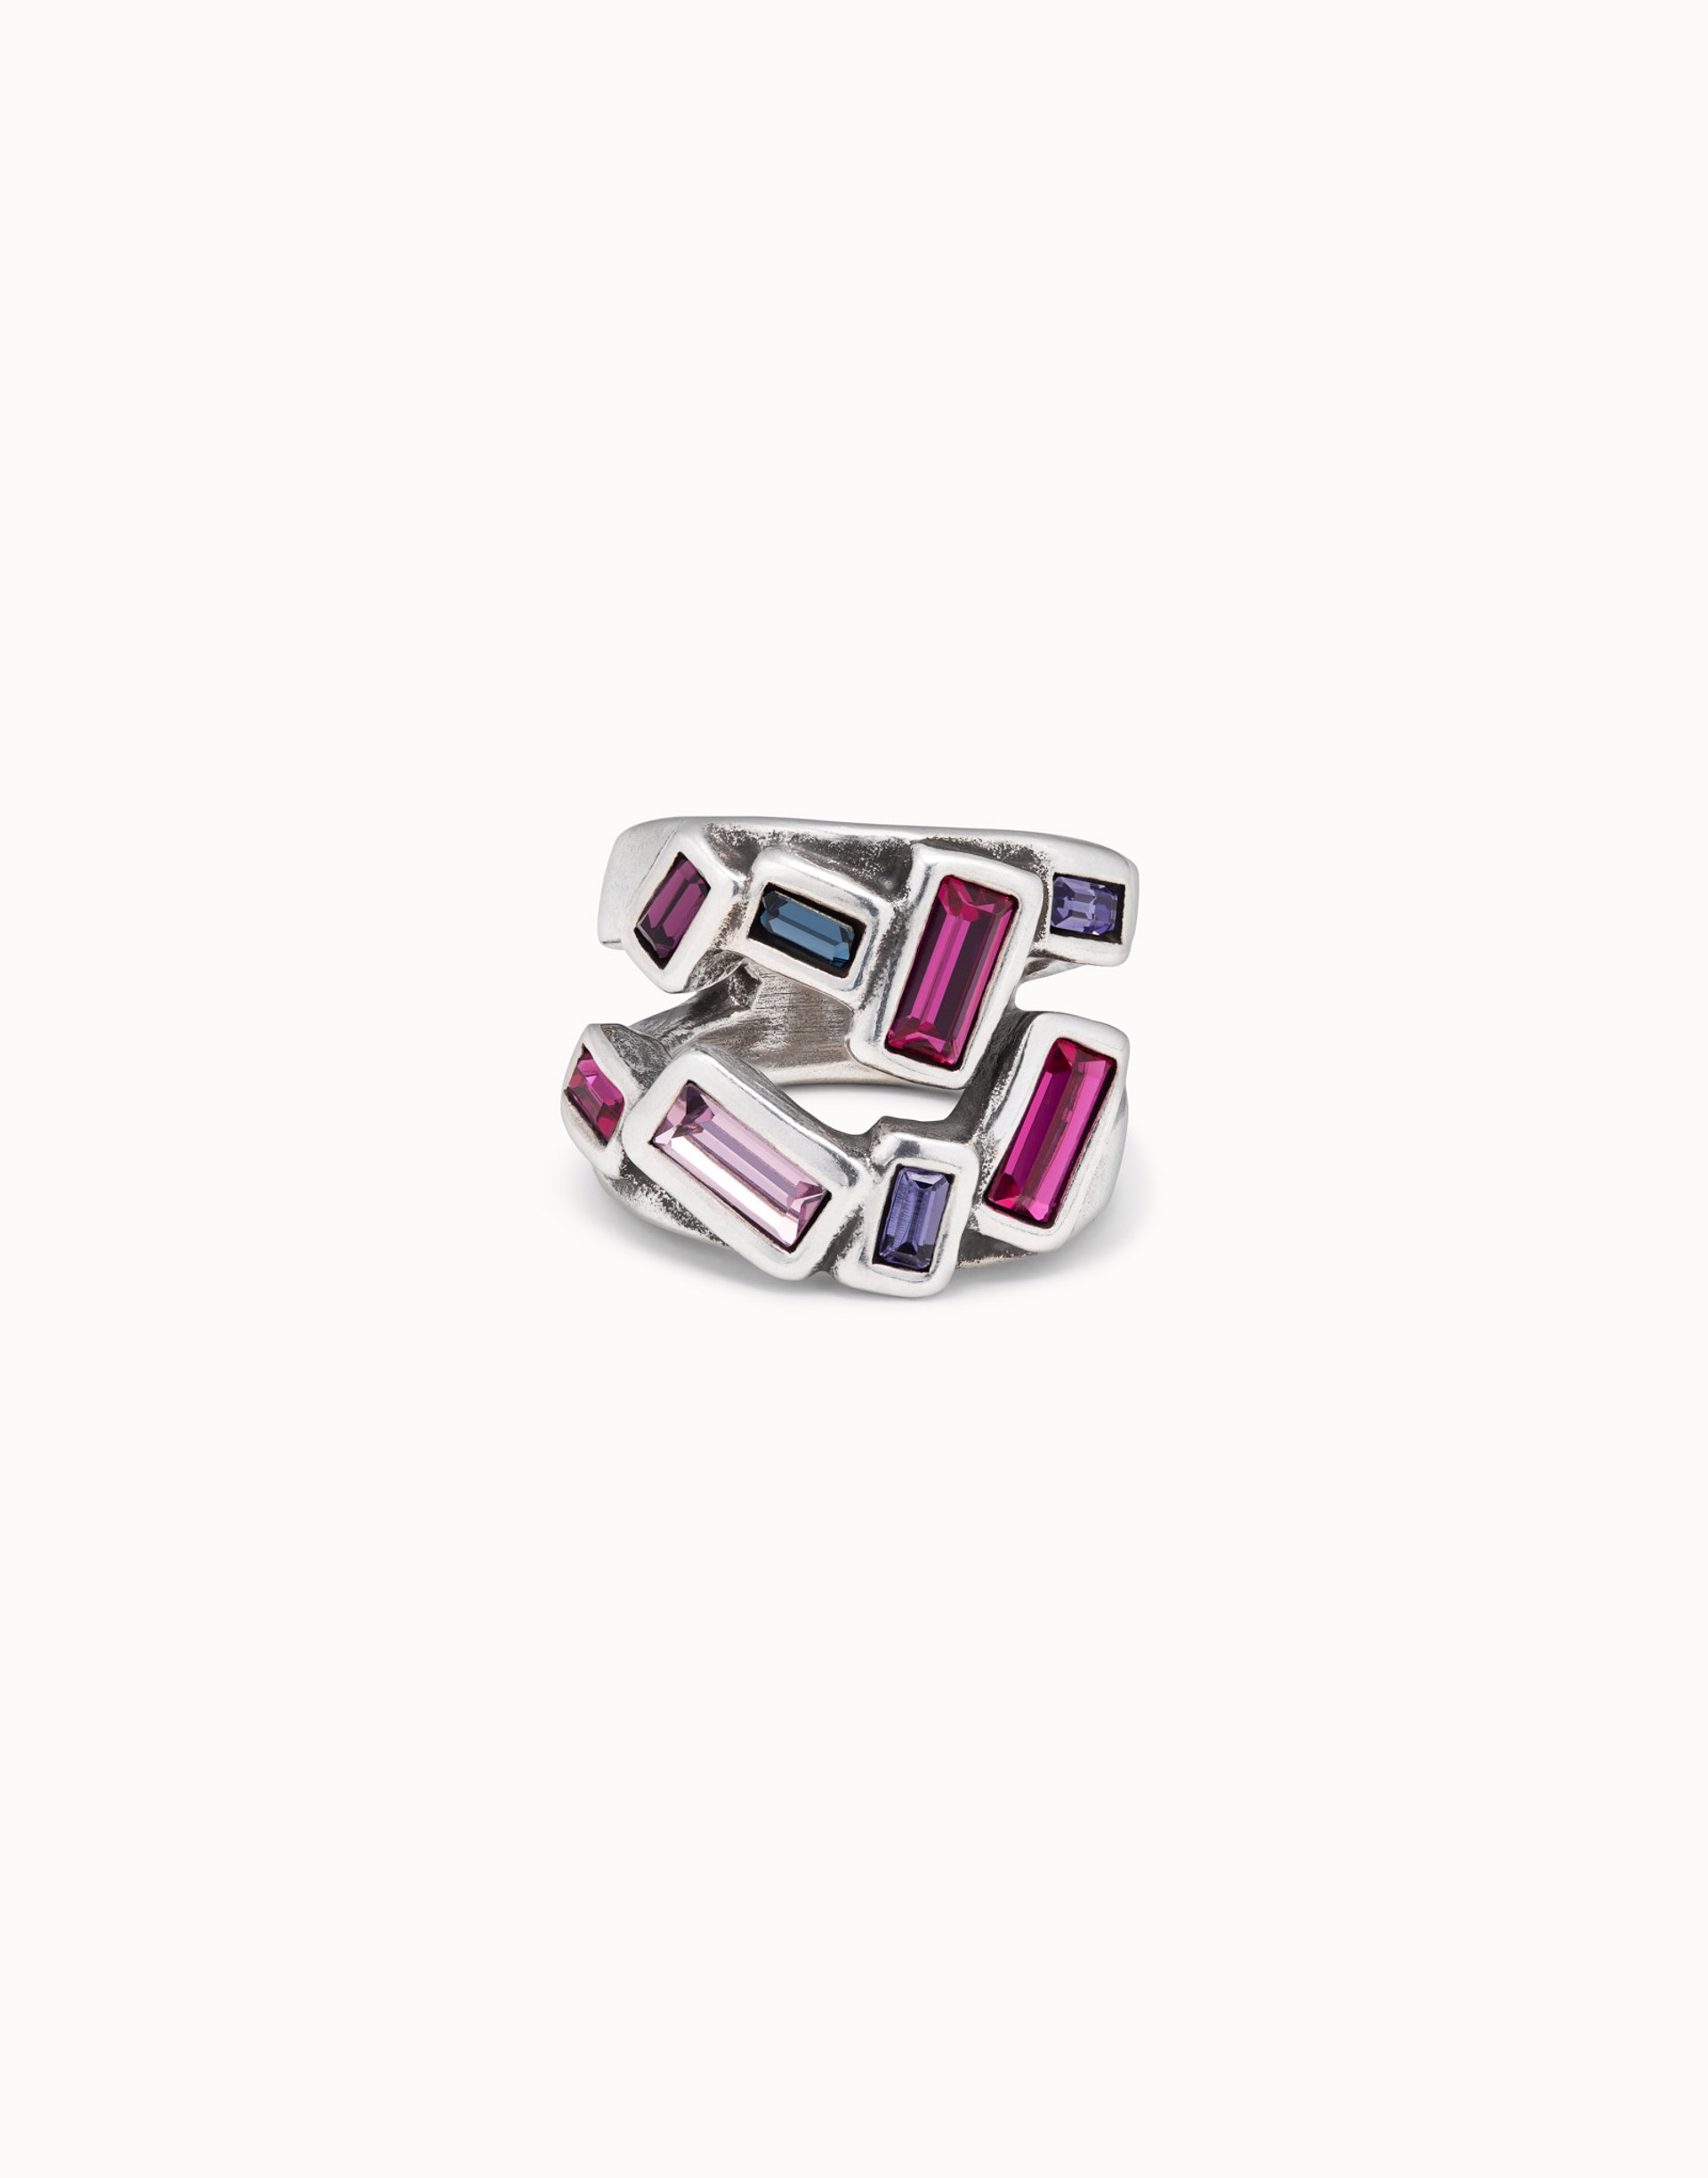 4786 PinkLady Ring by UNO DE 50